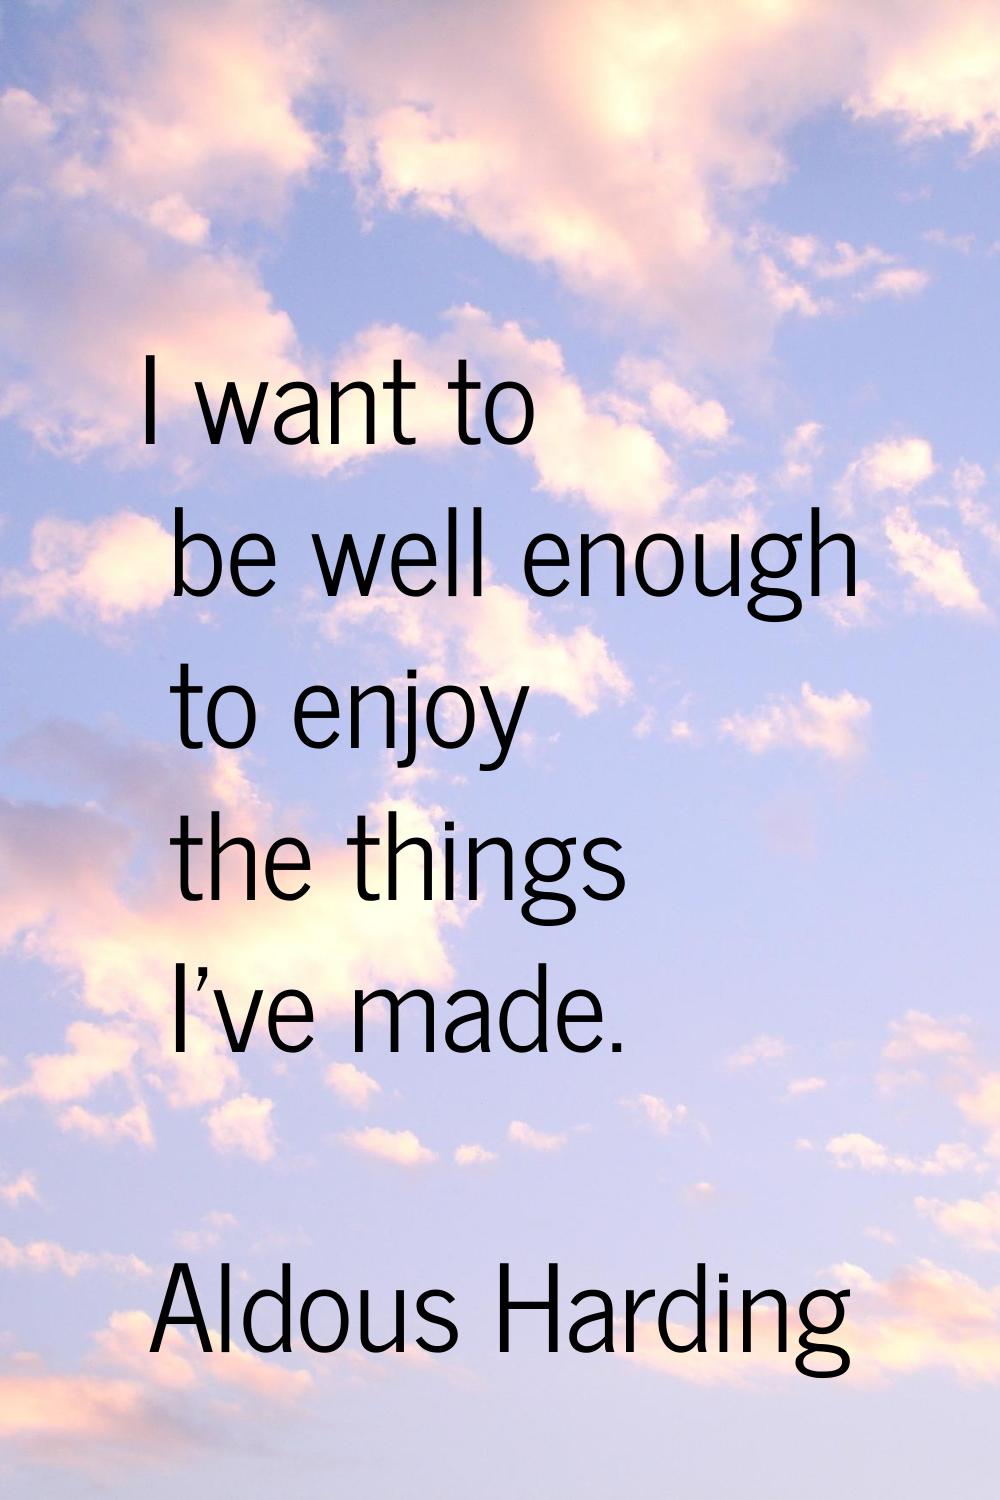 I want to be well enough to enjoy the things I've made.